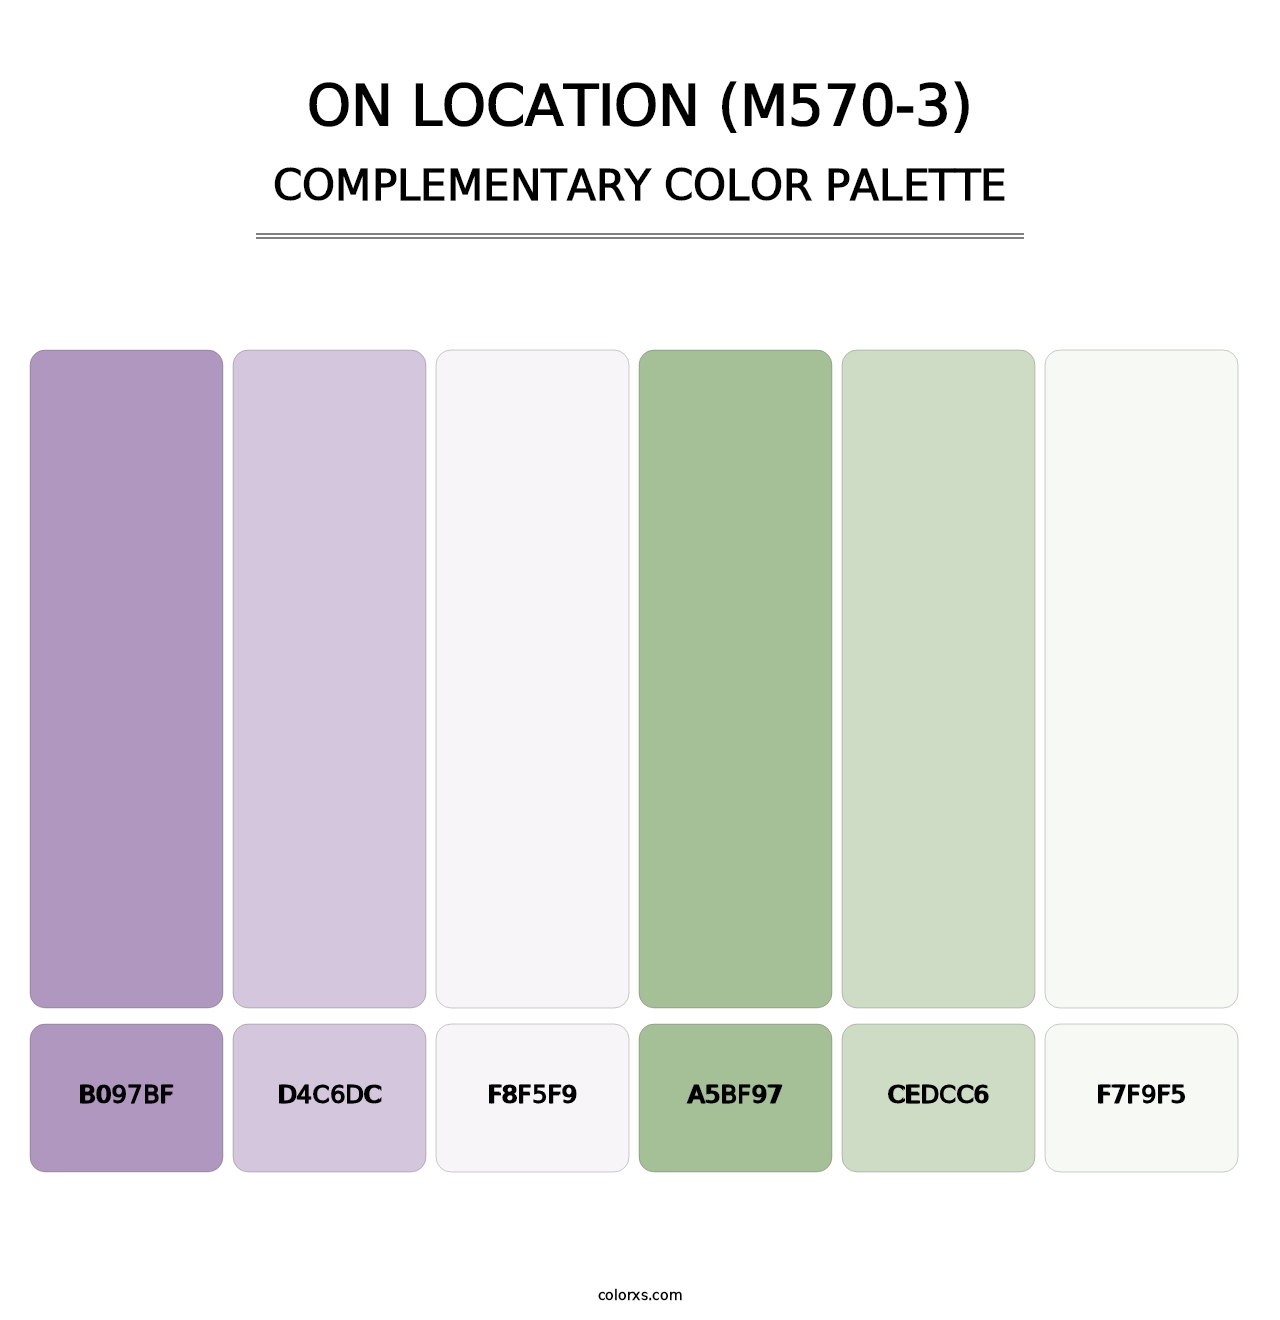 On Location (M570-3) - Complementary Color Palette